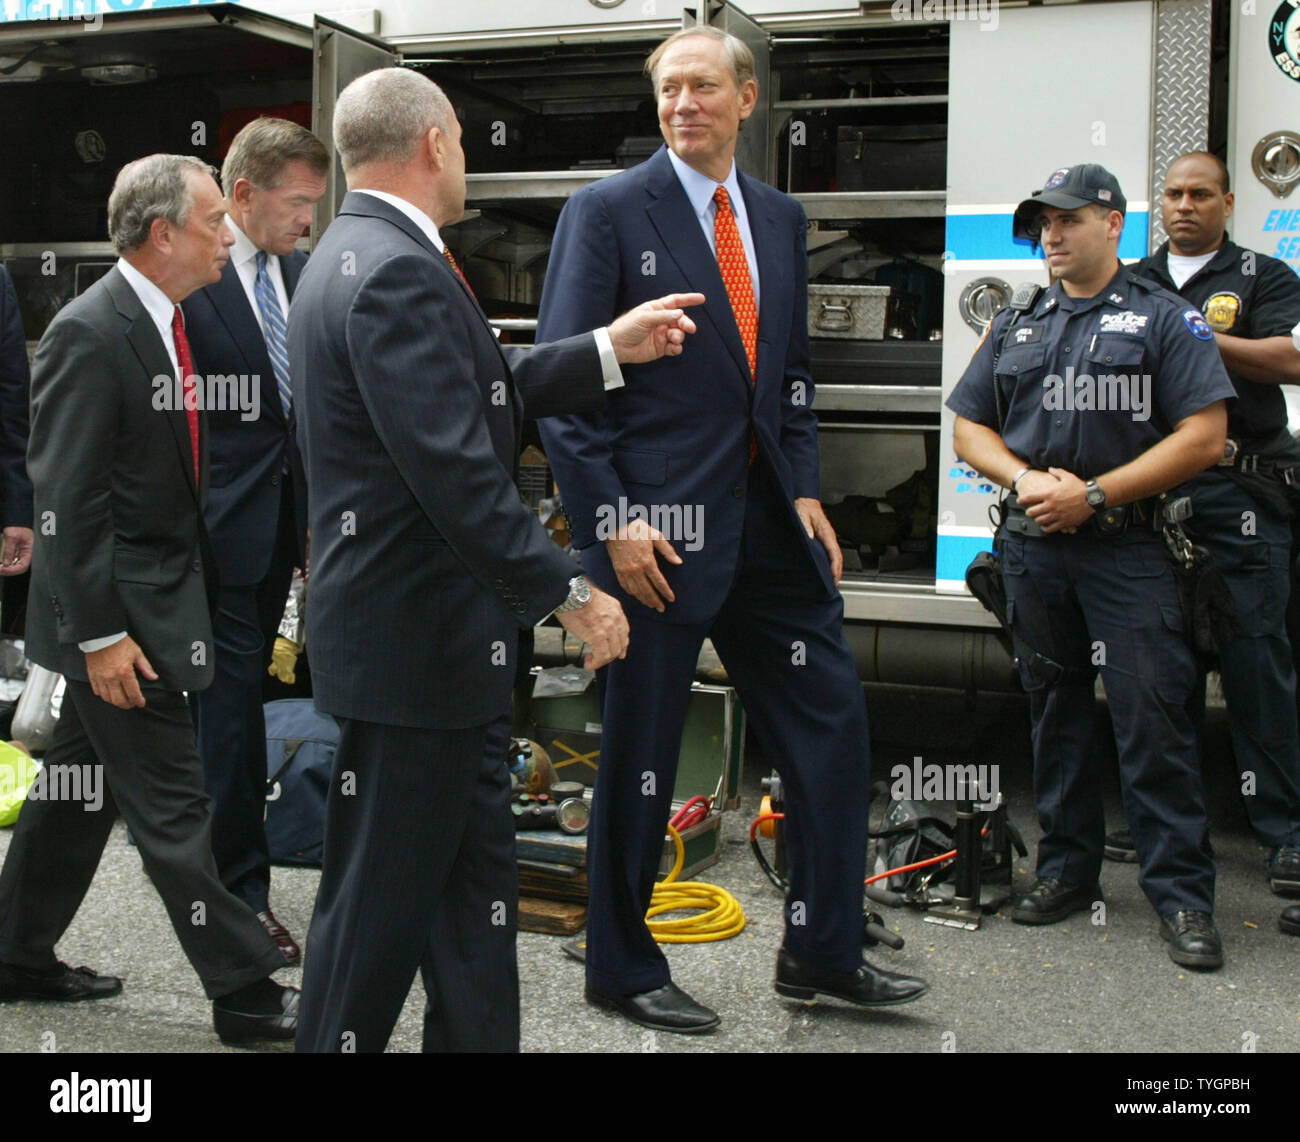 New York City police commissioner Raymond Kelly, center, gives mayor Michael Bloomberg, left, secretary of Homeland Security Tom Ridge, second left, and New York State governor George Pataki a tour of the special security vehicles and apparatus at the New York City Police Department's headquarters August 25, 2004 in New York City. Ridge is on hand to discuss security measures with city officials in preparation for the Republican National Convention and the demonstrators it will attract to the city. (UPI Photo/Monika Graff) Stock Photo